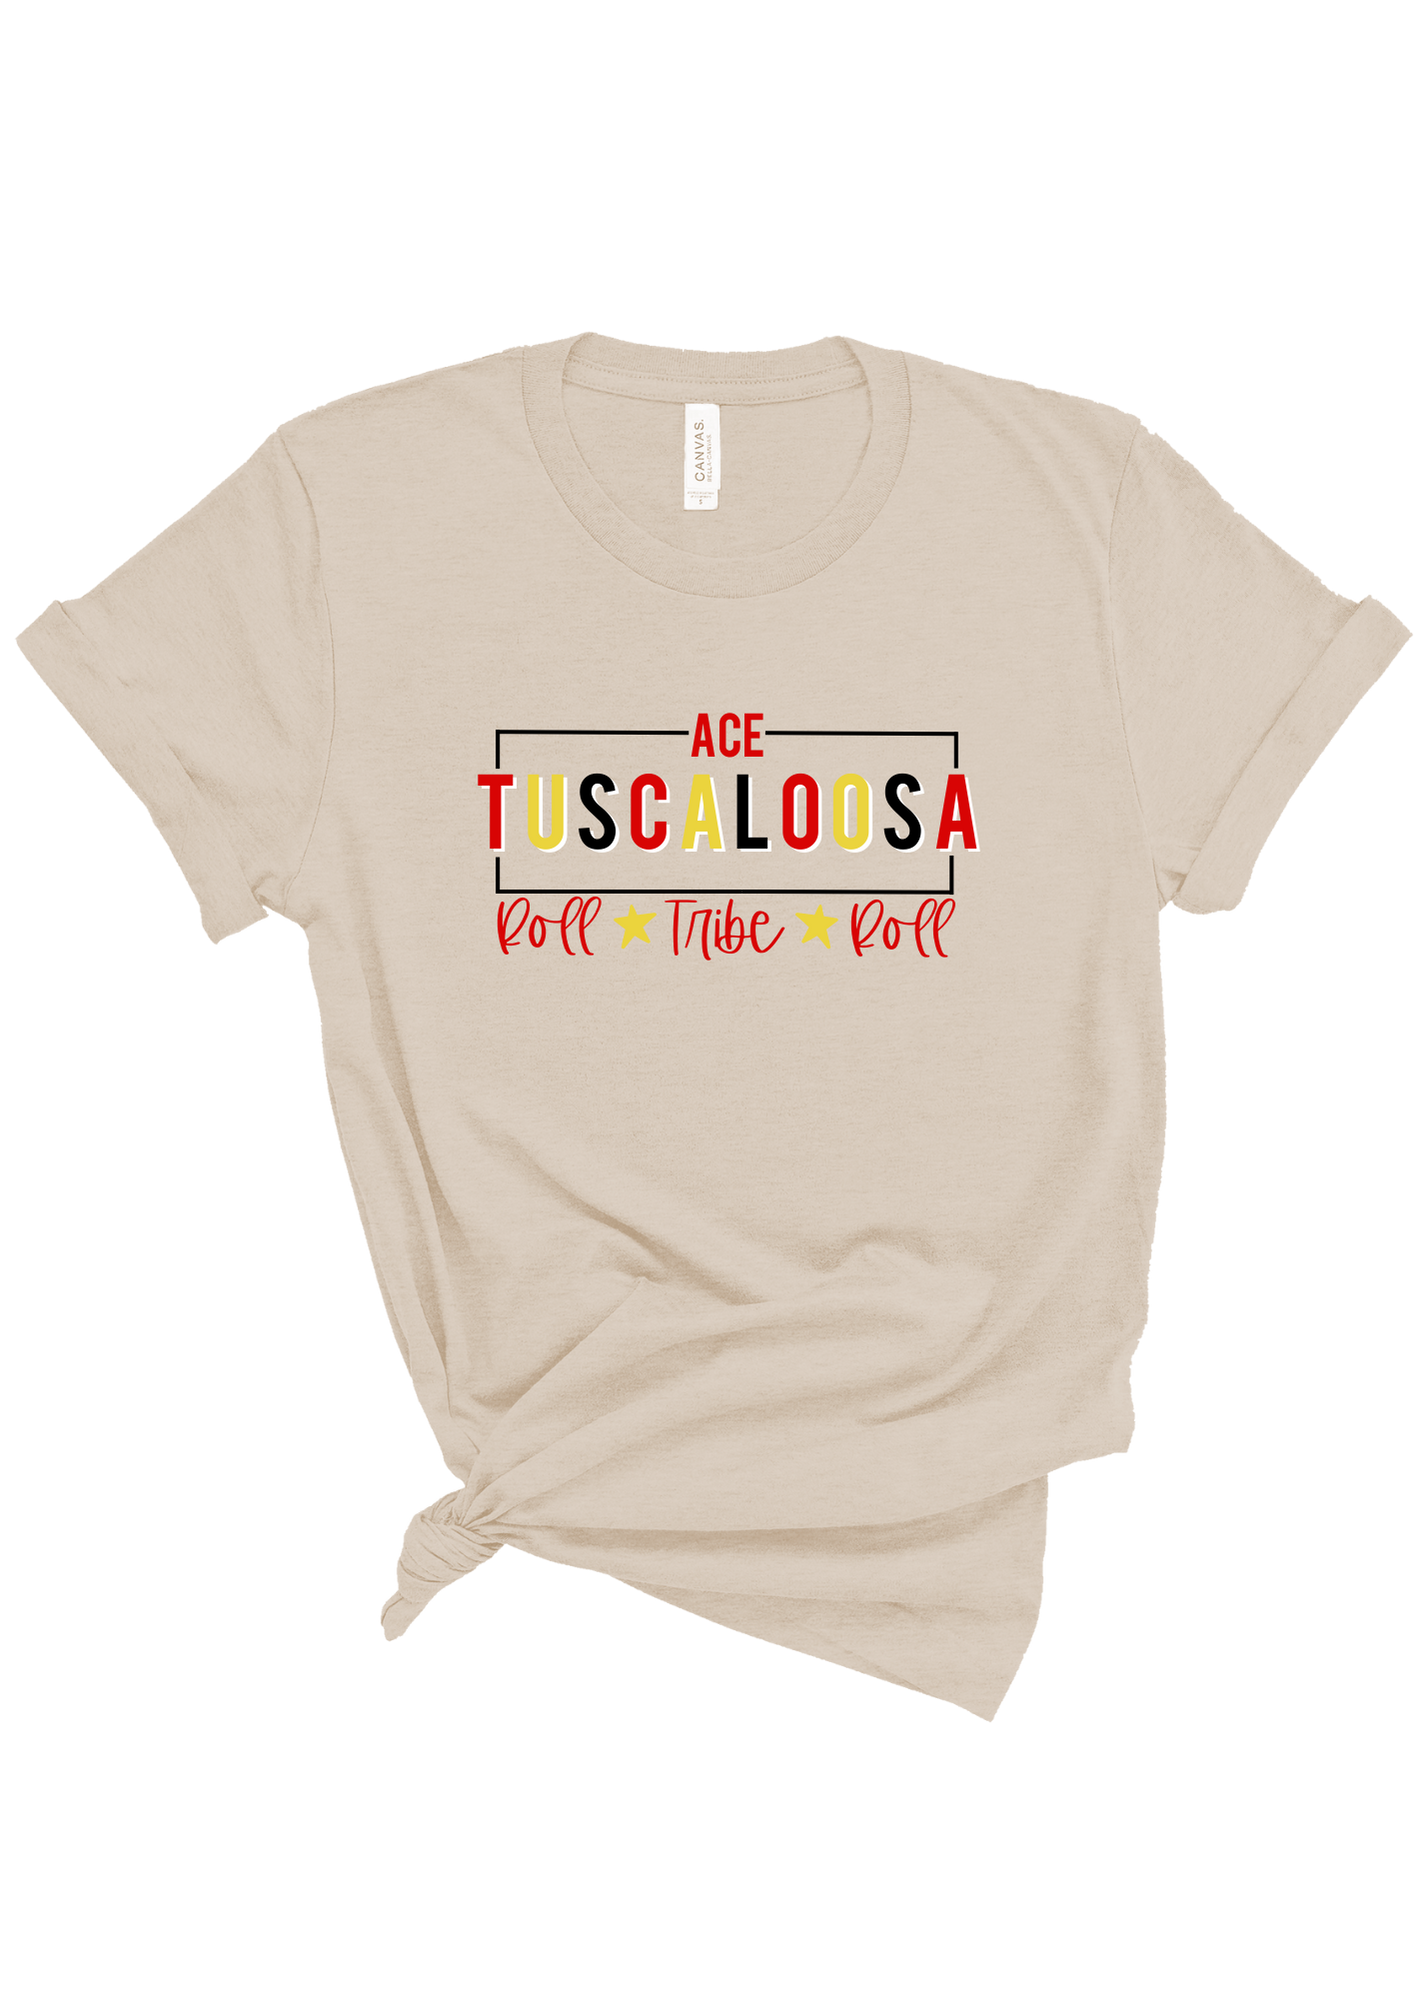 ACE Tuscaloosa | Adult Tee-Adult Tee-Sister Shirts-Sister Shirts, Cute & Custom Tees for Mama & Littles in Trussville, Alabama.